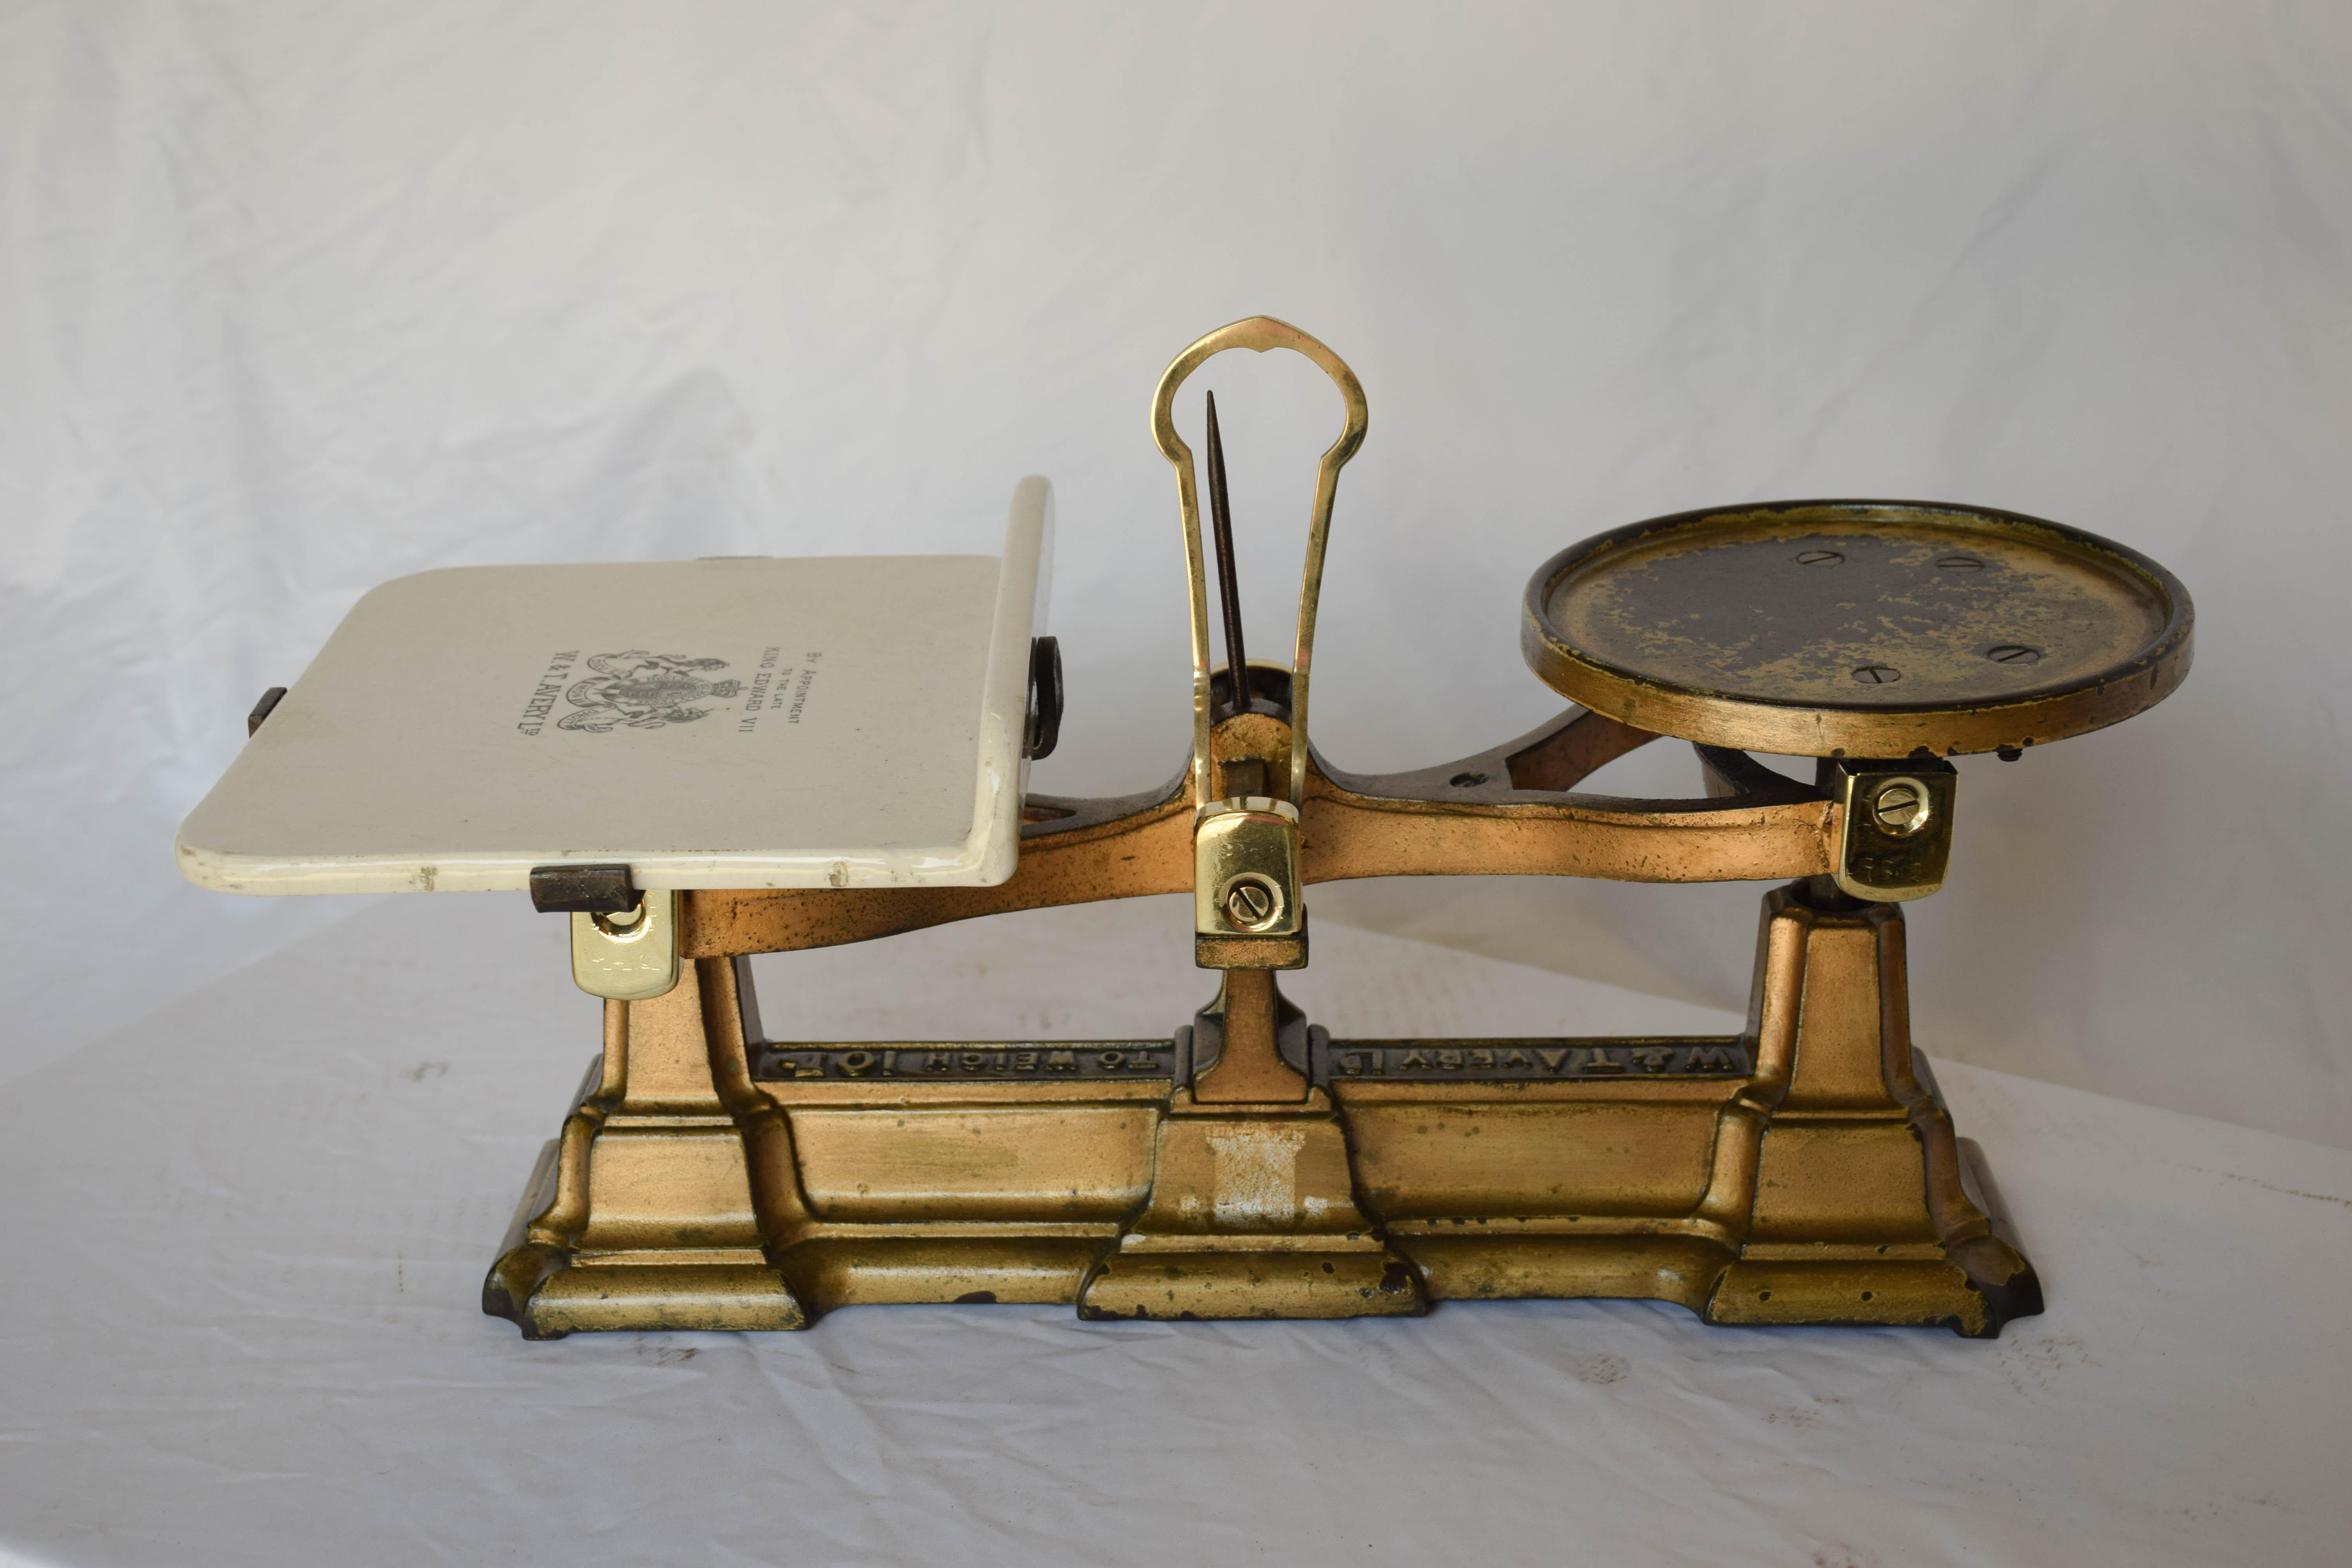 Antique wrought iron weight balance scale by W and T Avery Ltd. Lovely black transfer on a porcelain china plate, by appointment by the late King Edward VII. This scale would look great in any kitchen decor.